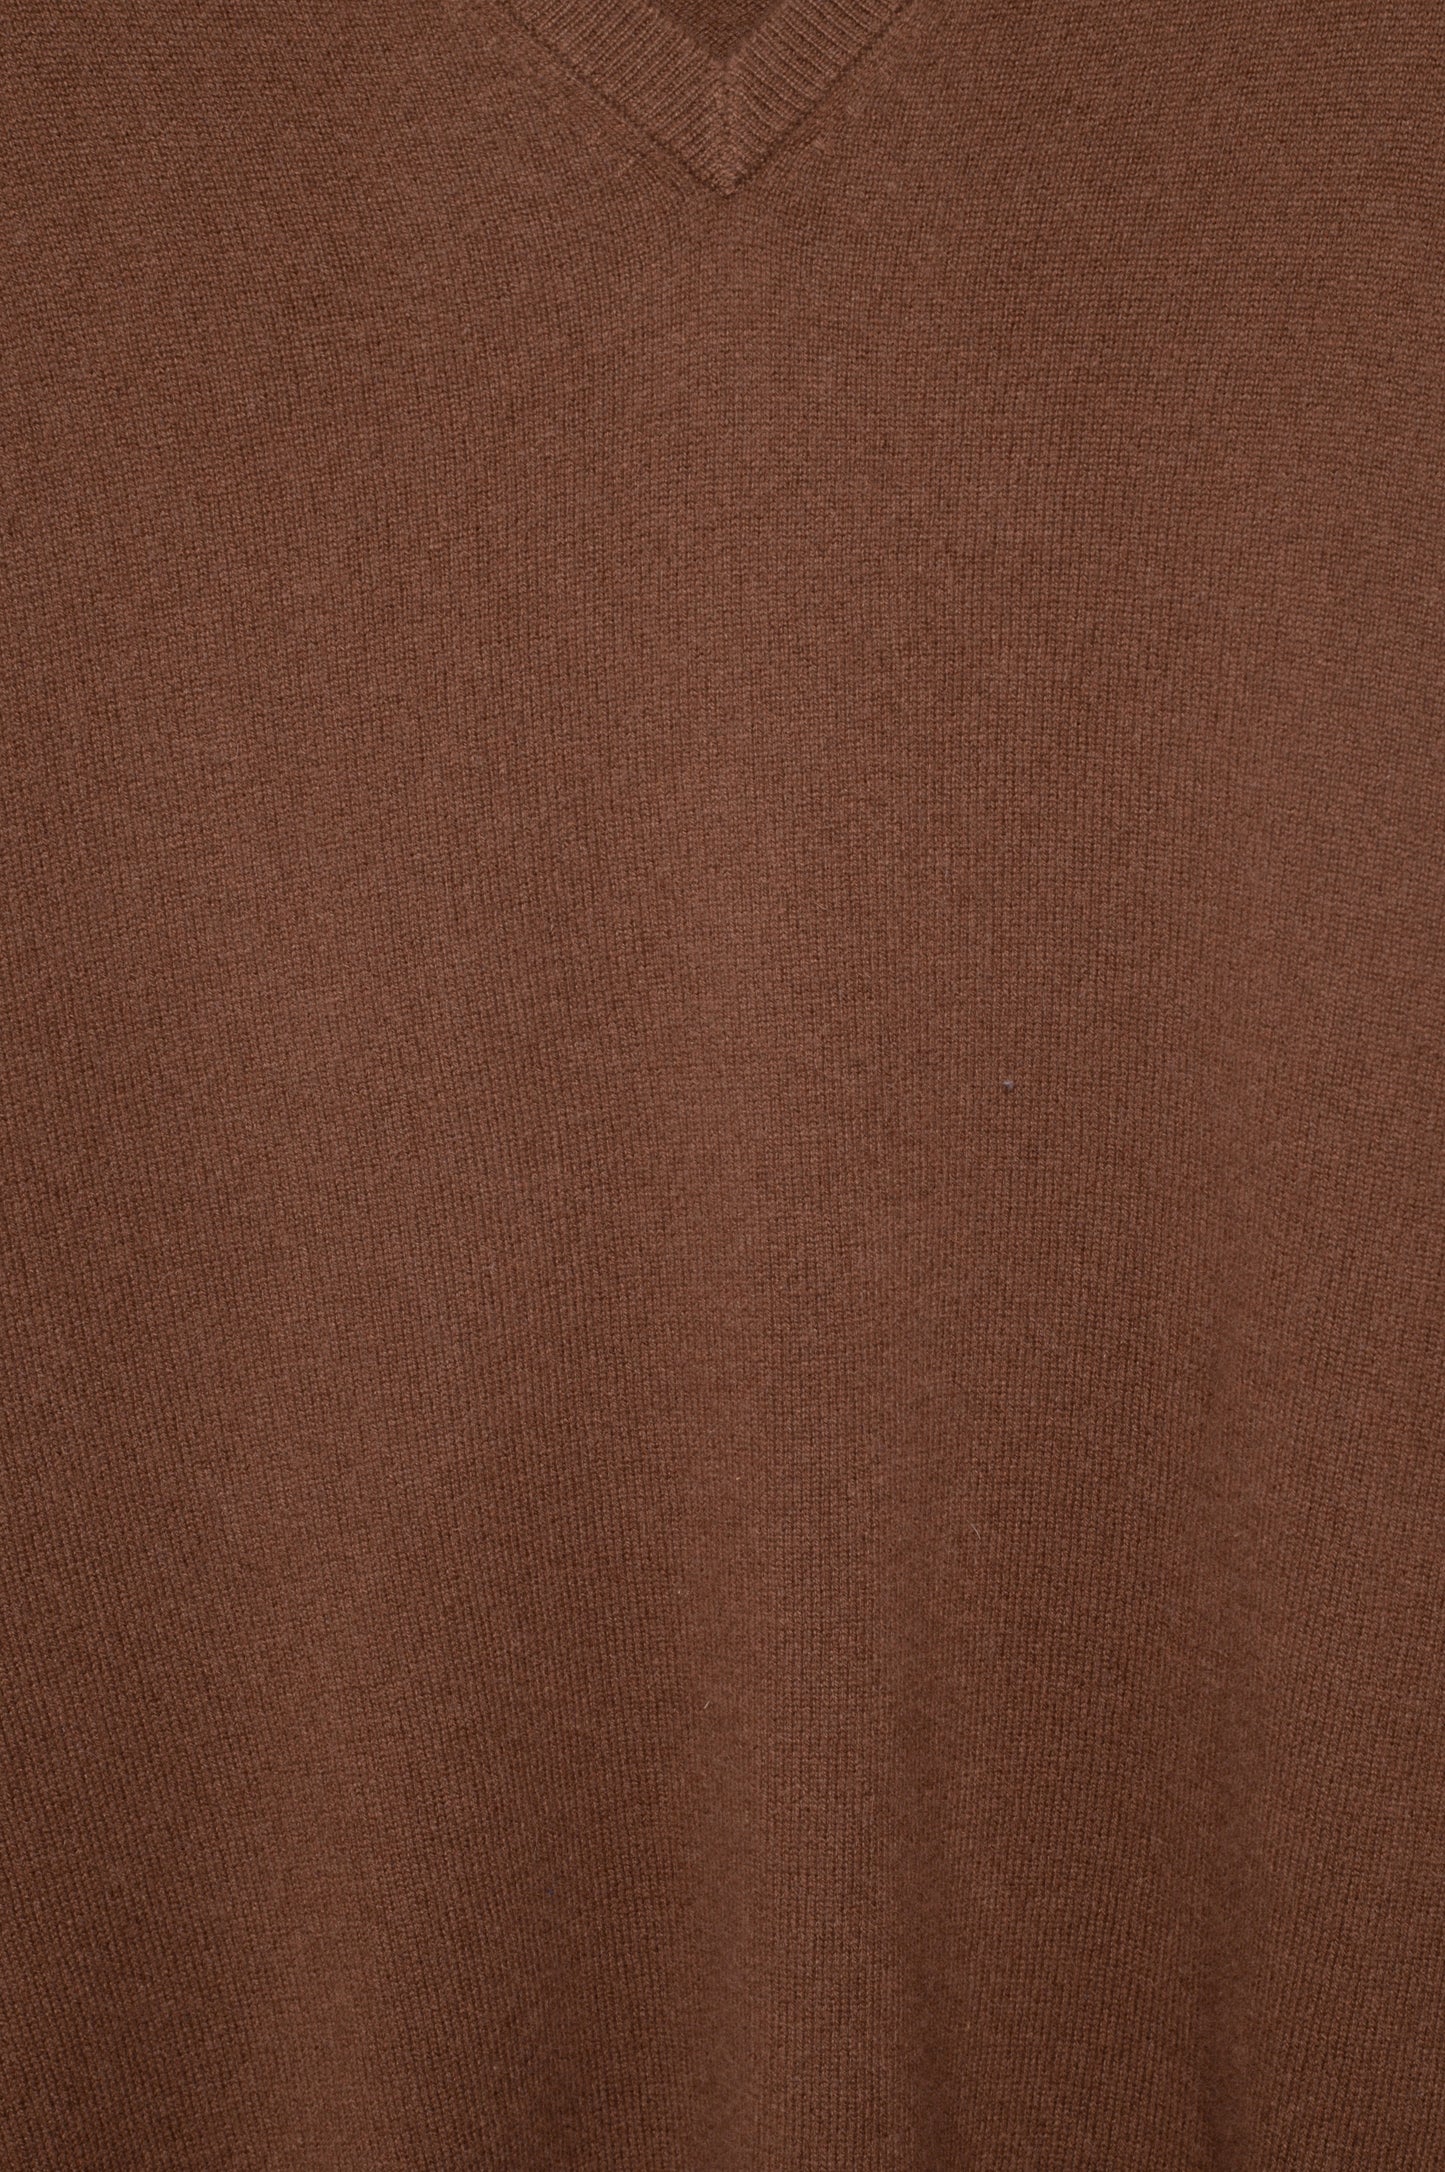 Chocolate Brown Cashmere Sweater